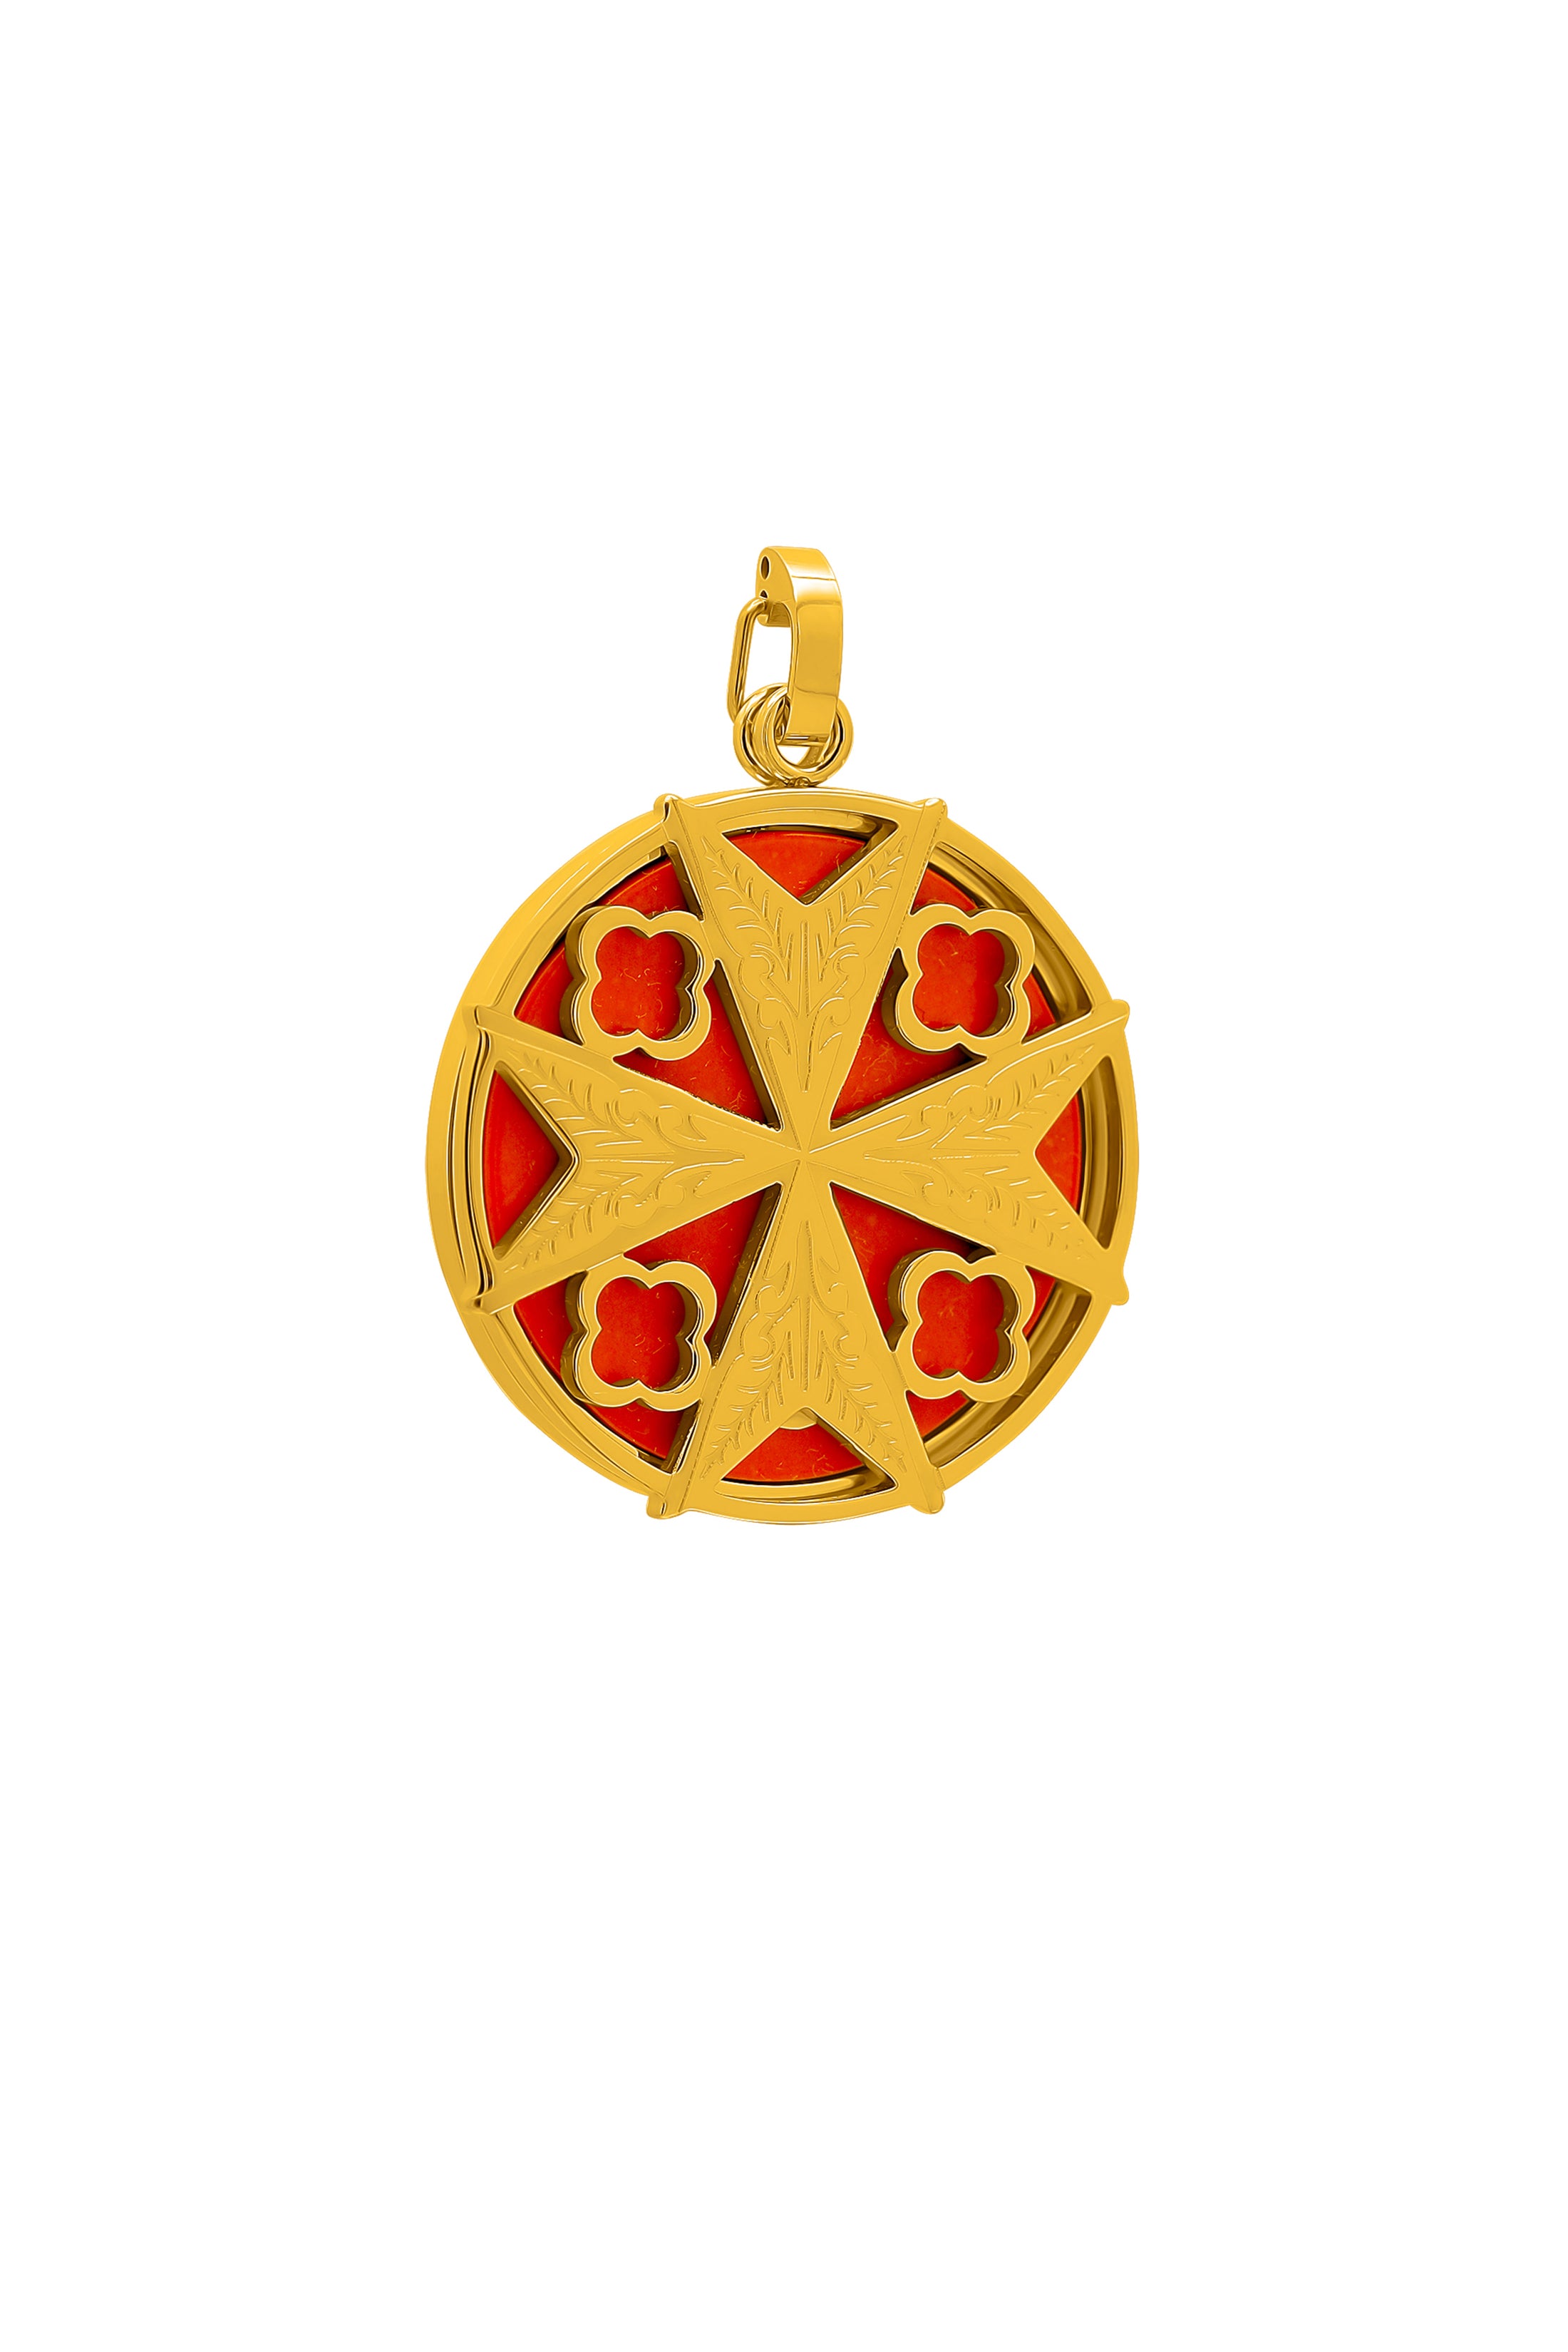 Maltese Cross Hollow Pendant and Red Stone Pendant